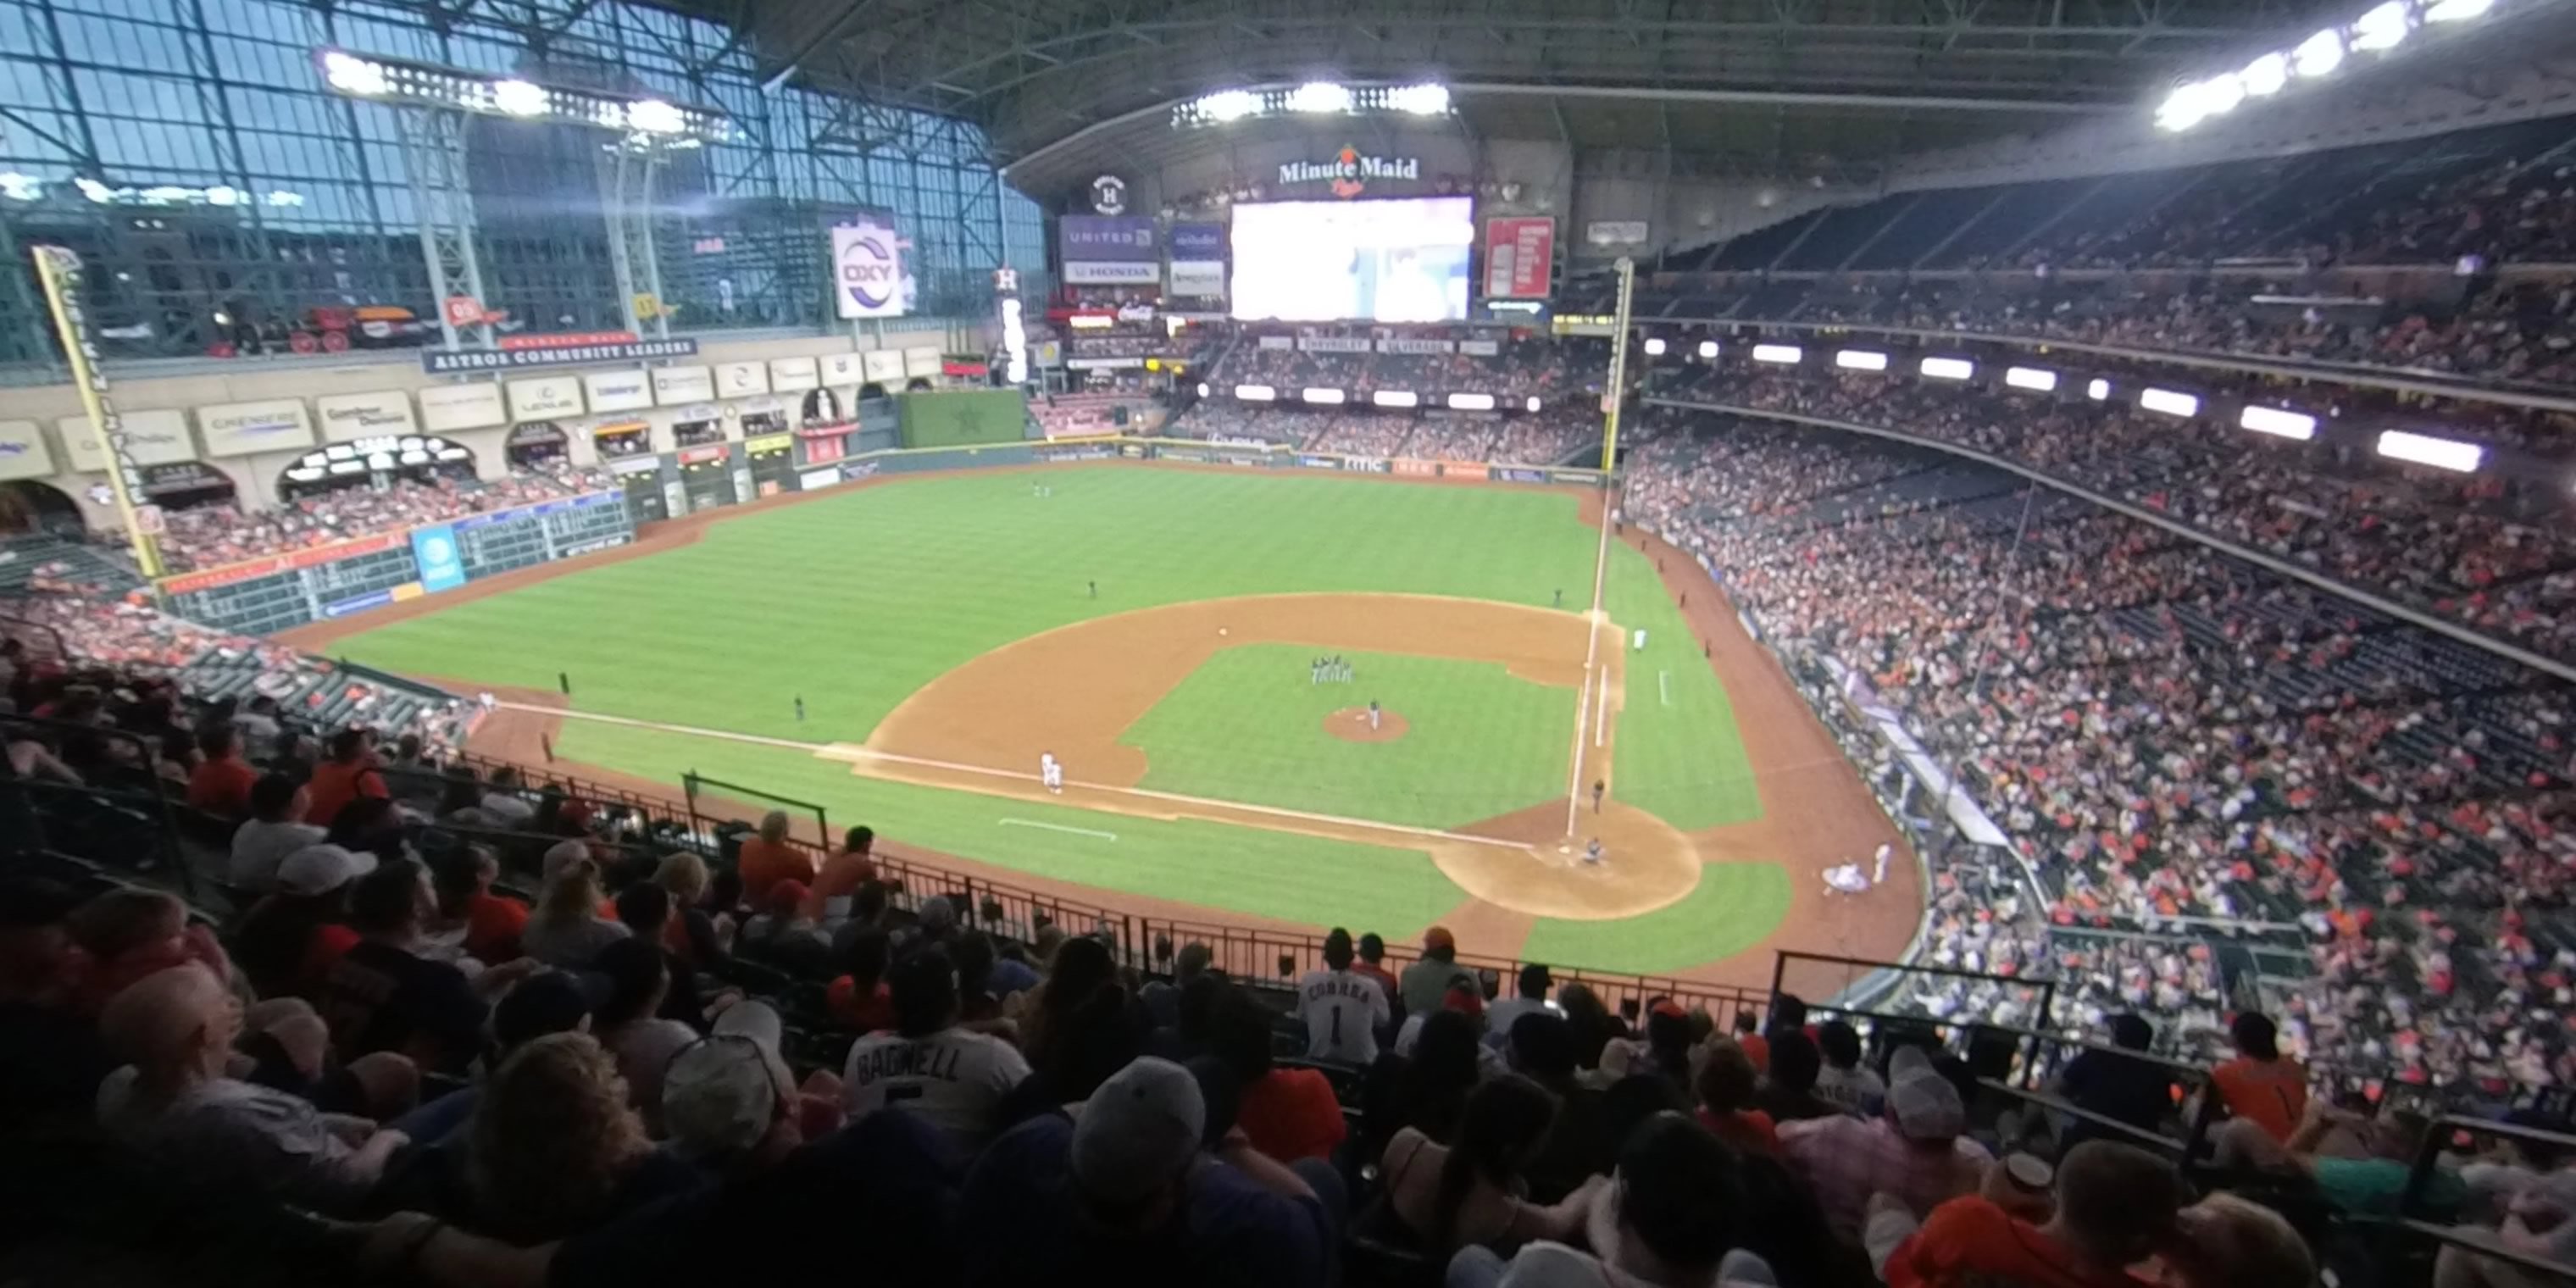 section 315 panoramic seat view  for baseball - minute maid park